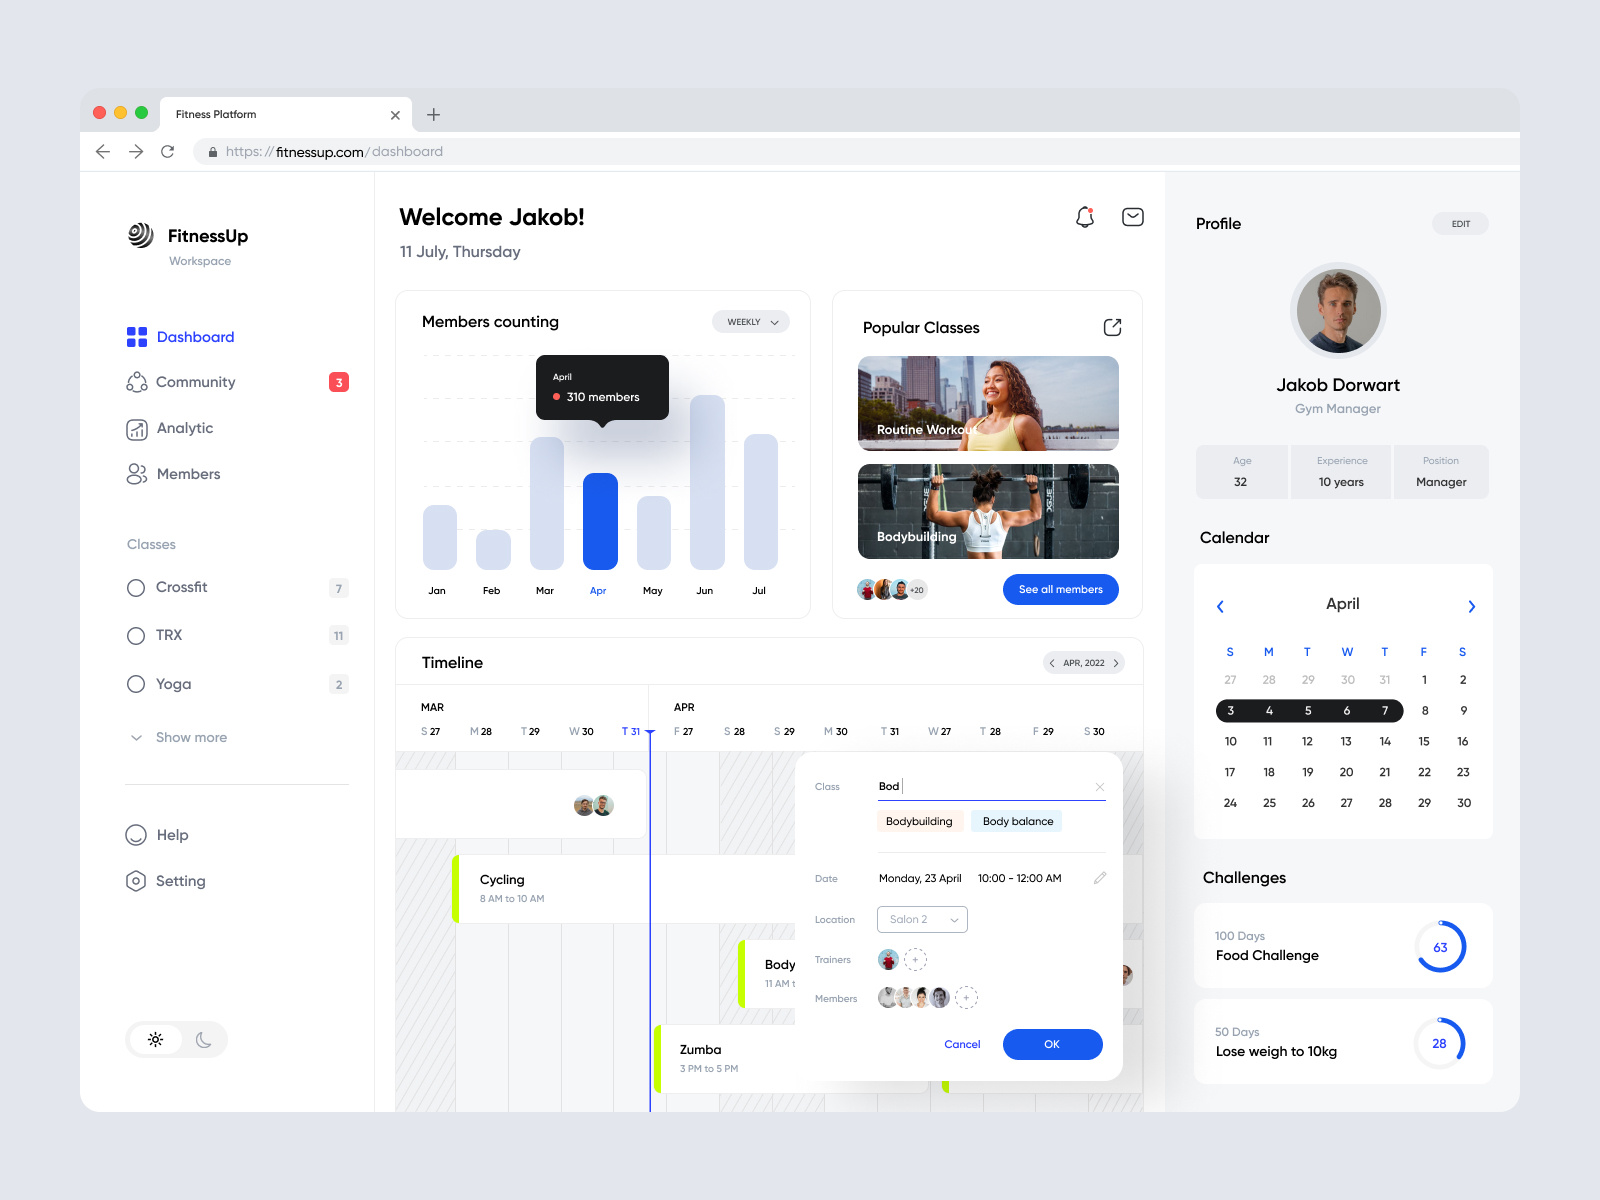 The white background and gray sidebar with the calendar looks very fresh. Cool timeline built into the content of the page. Nice and modern dashboard